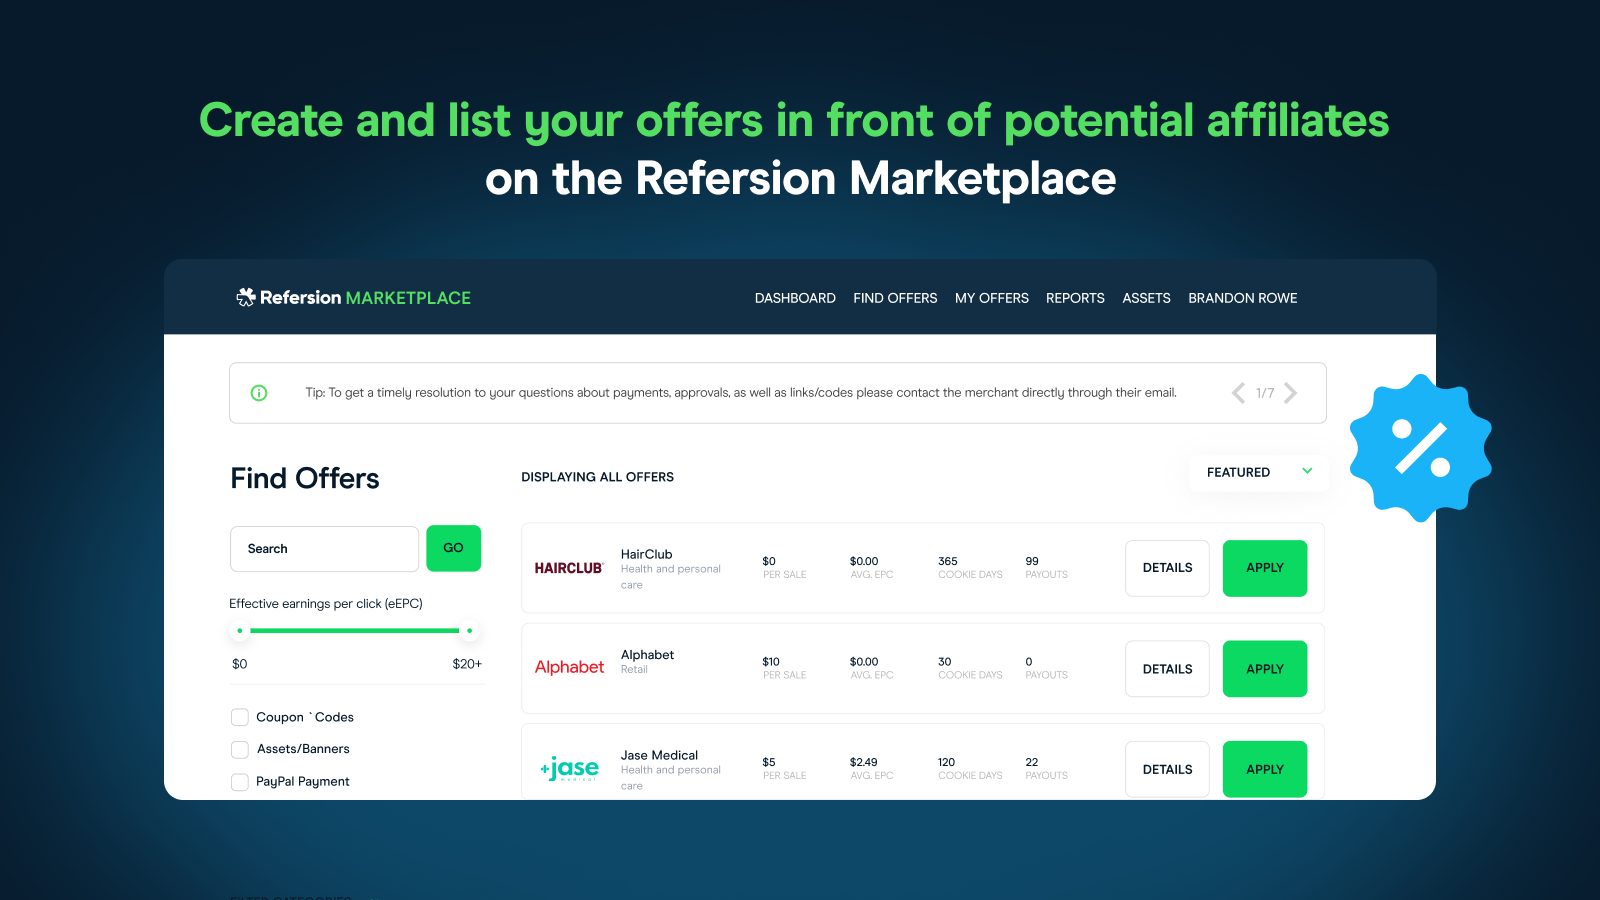 Create unique offers for your campaigns and acquire new affiliates from the Refersion Marketplace.